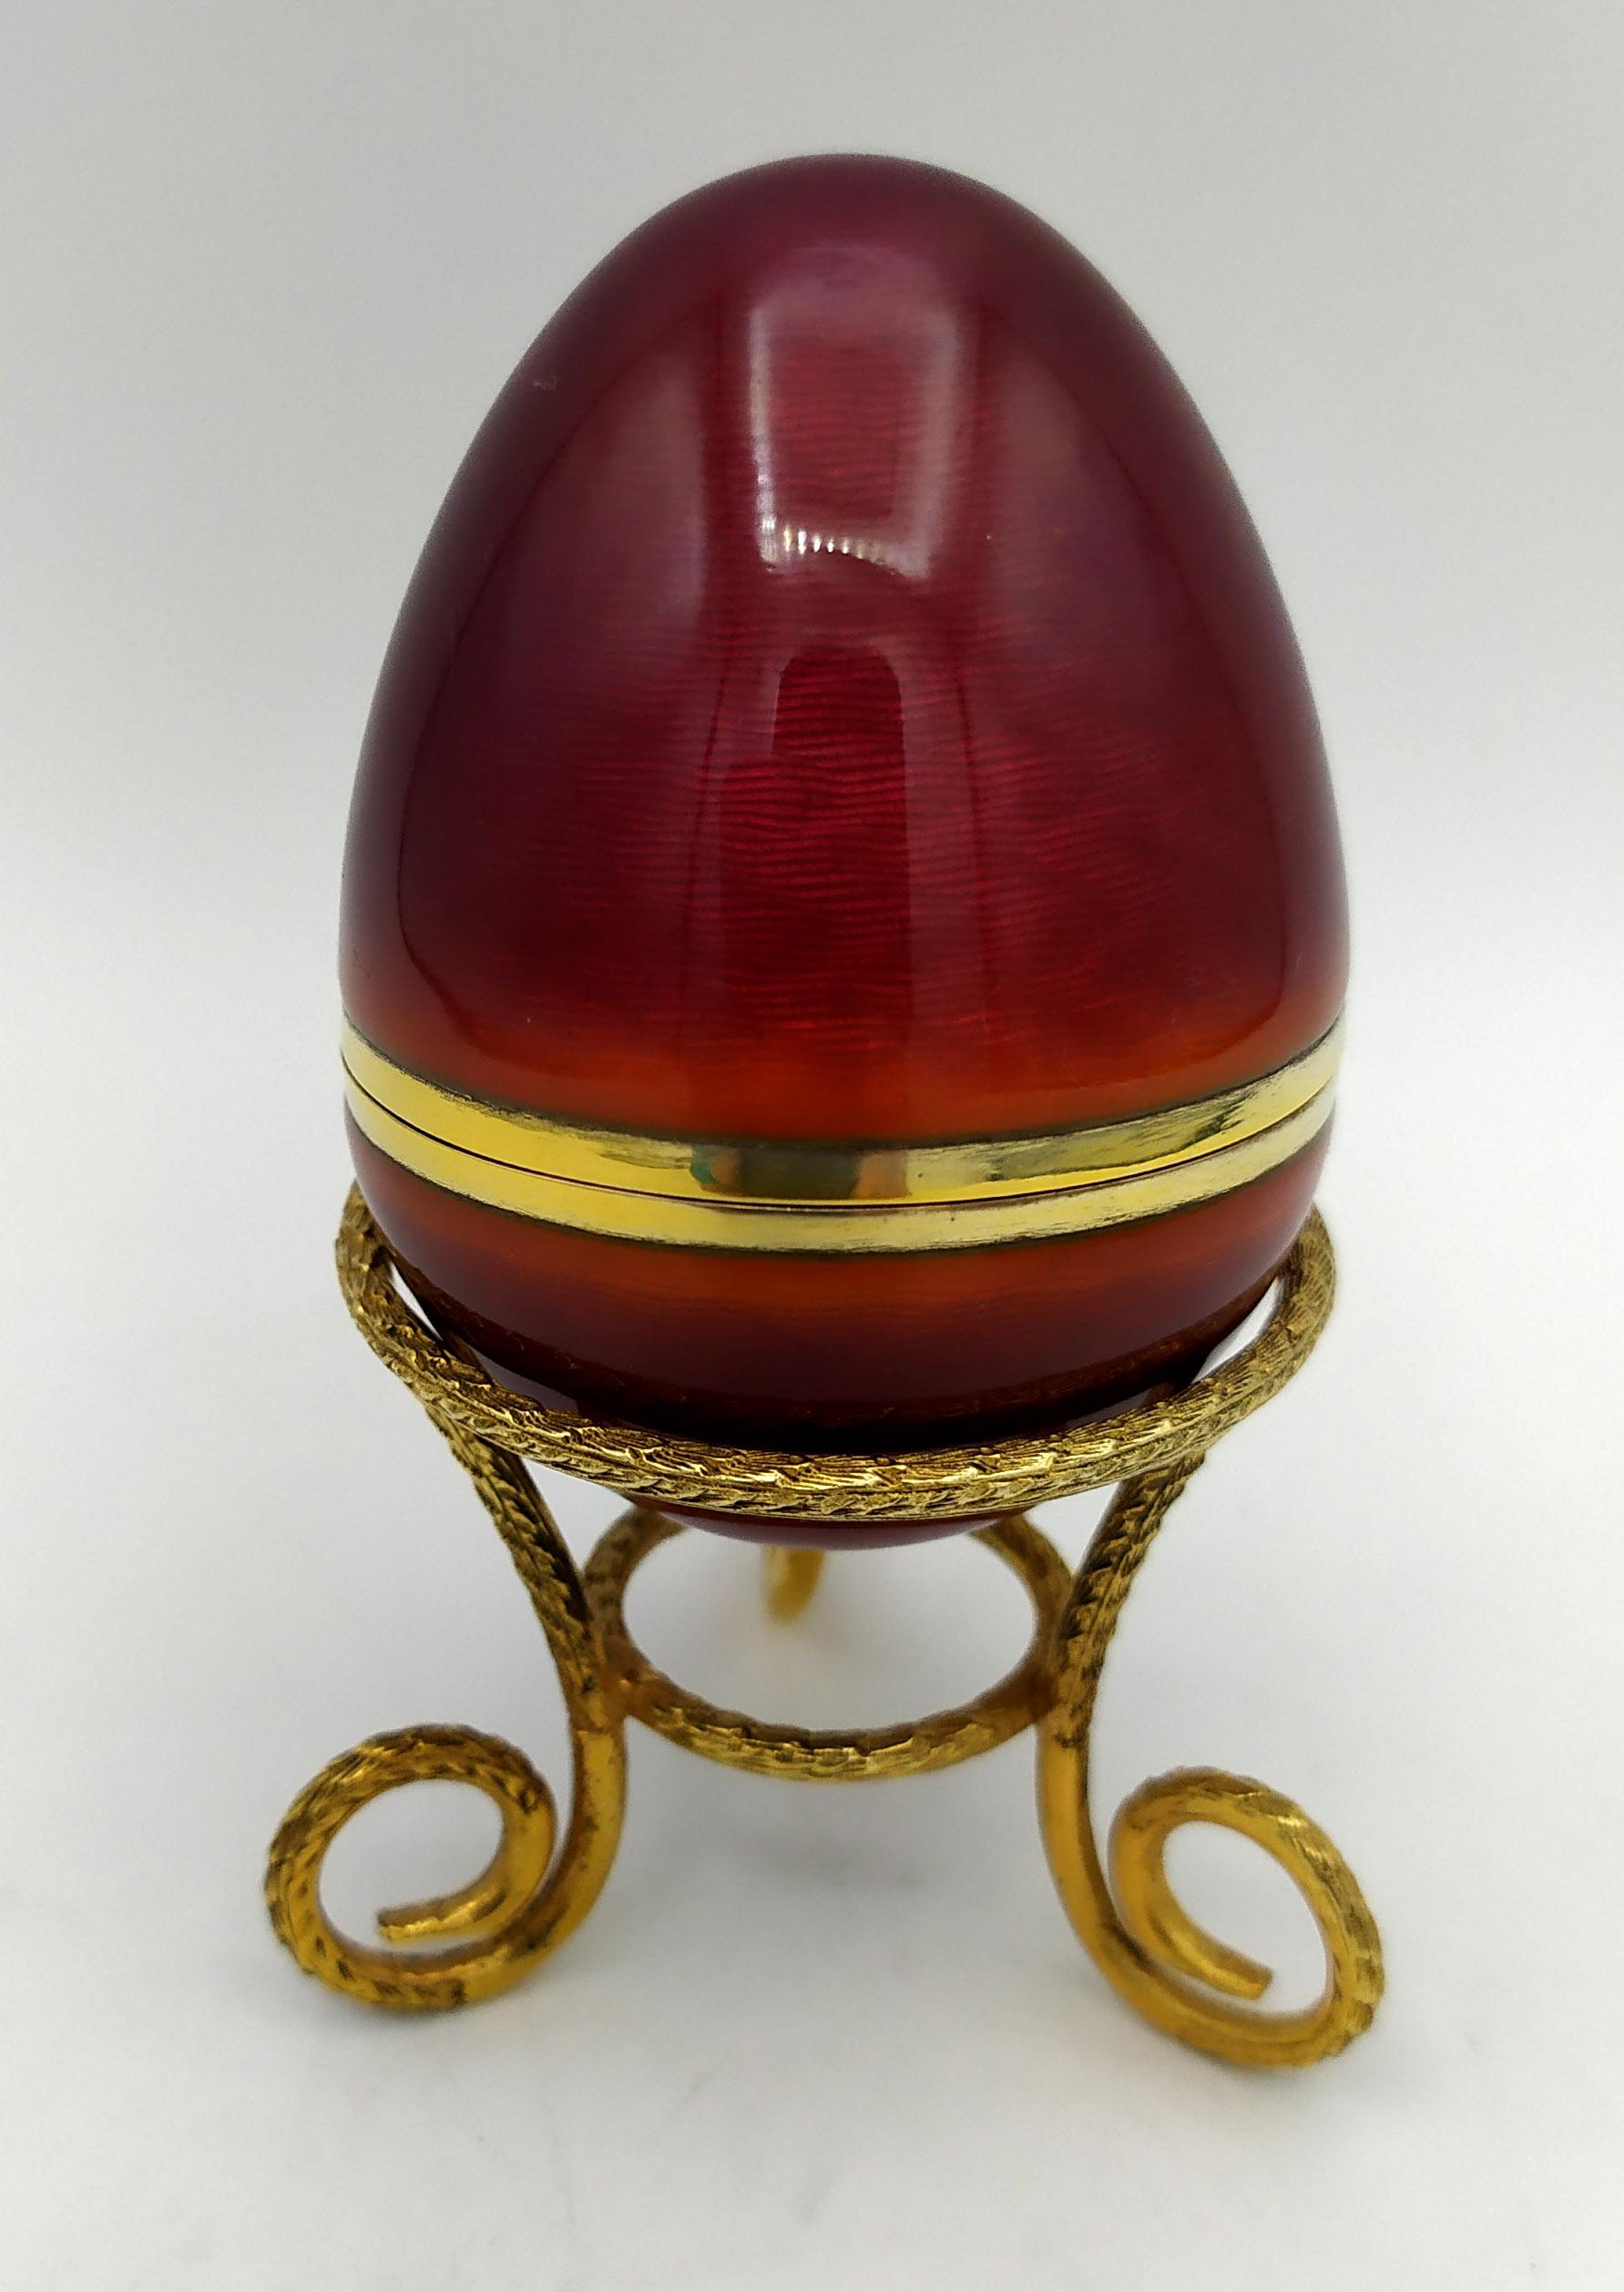 
Egg Purple Red enamel is in 925/1000 sterling silver.
Egg Purple Red enamel has fired enamels on guilloché has fired enamels on guilloché and design engraved by hand.
Egg Purple Red enamel is Russian Empire style inspired by Carl Fabergè eggs late